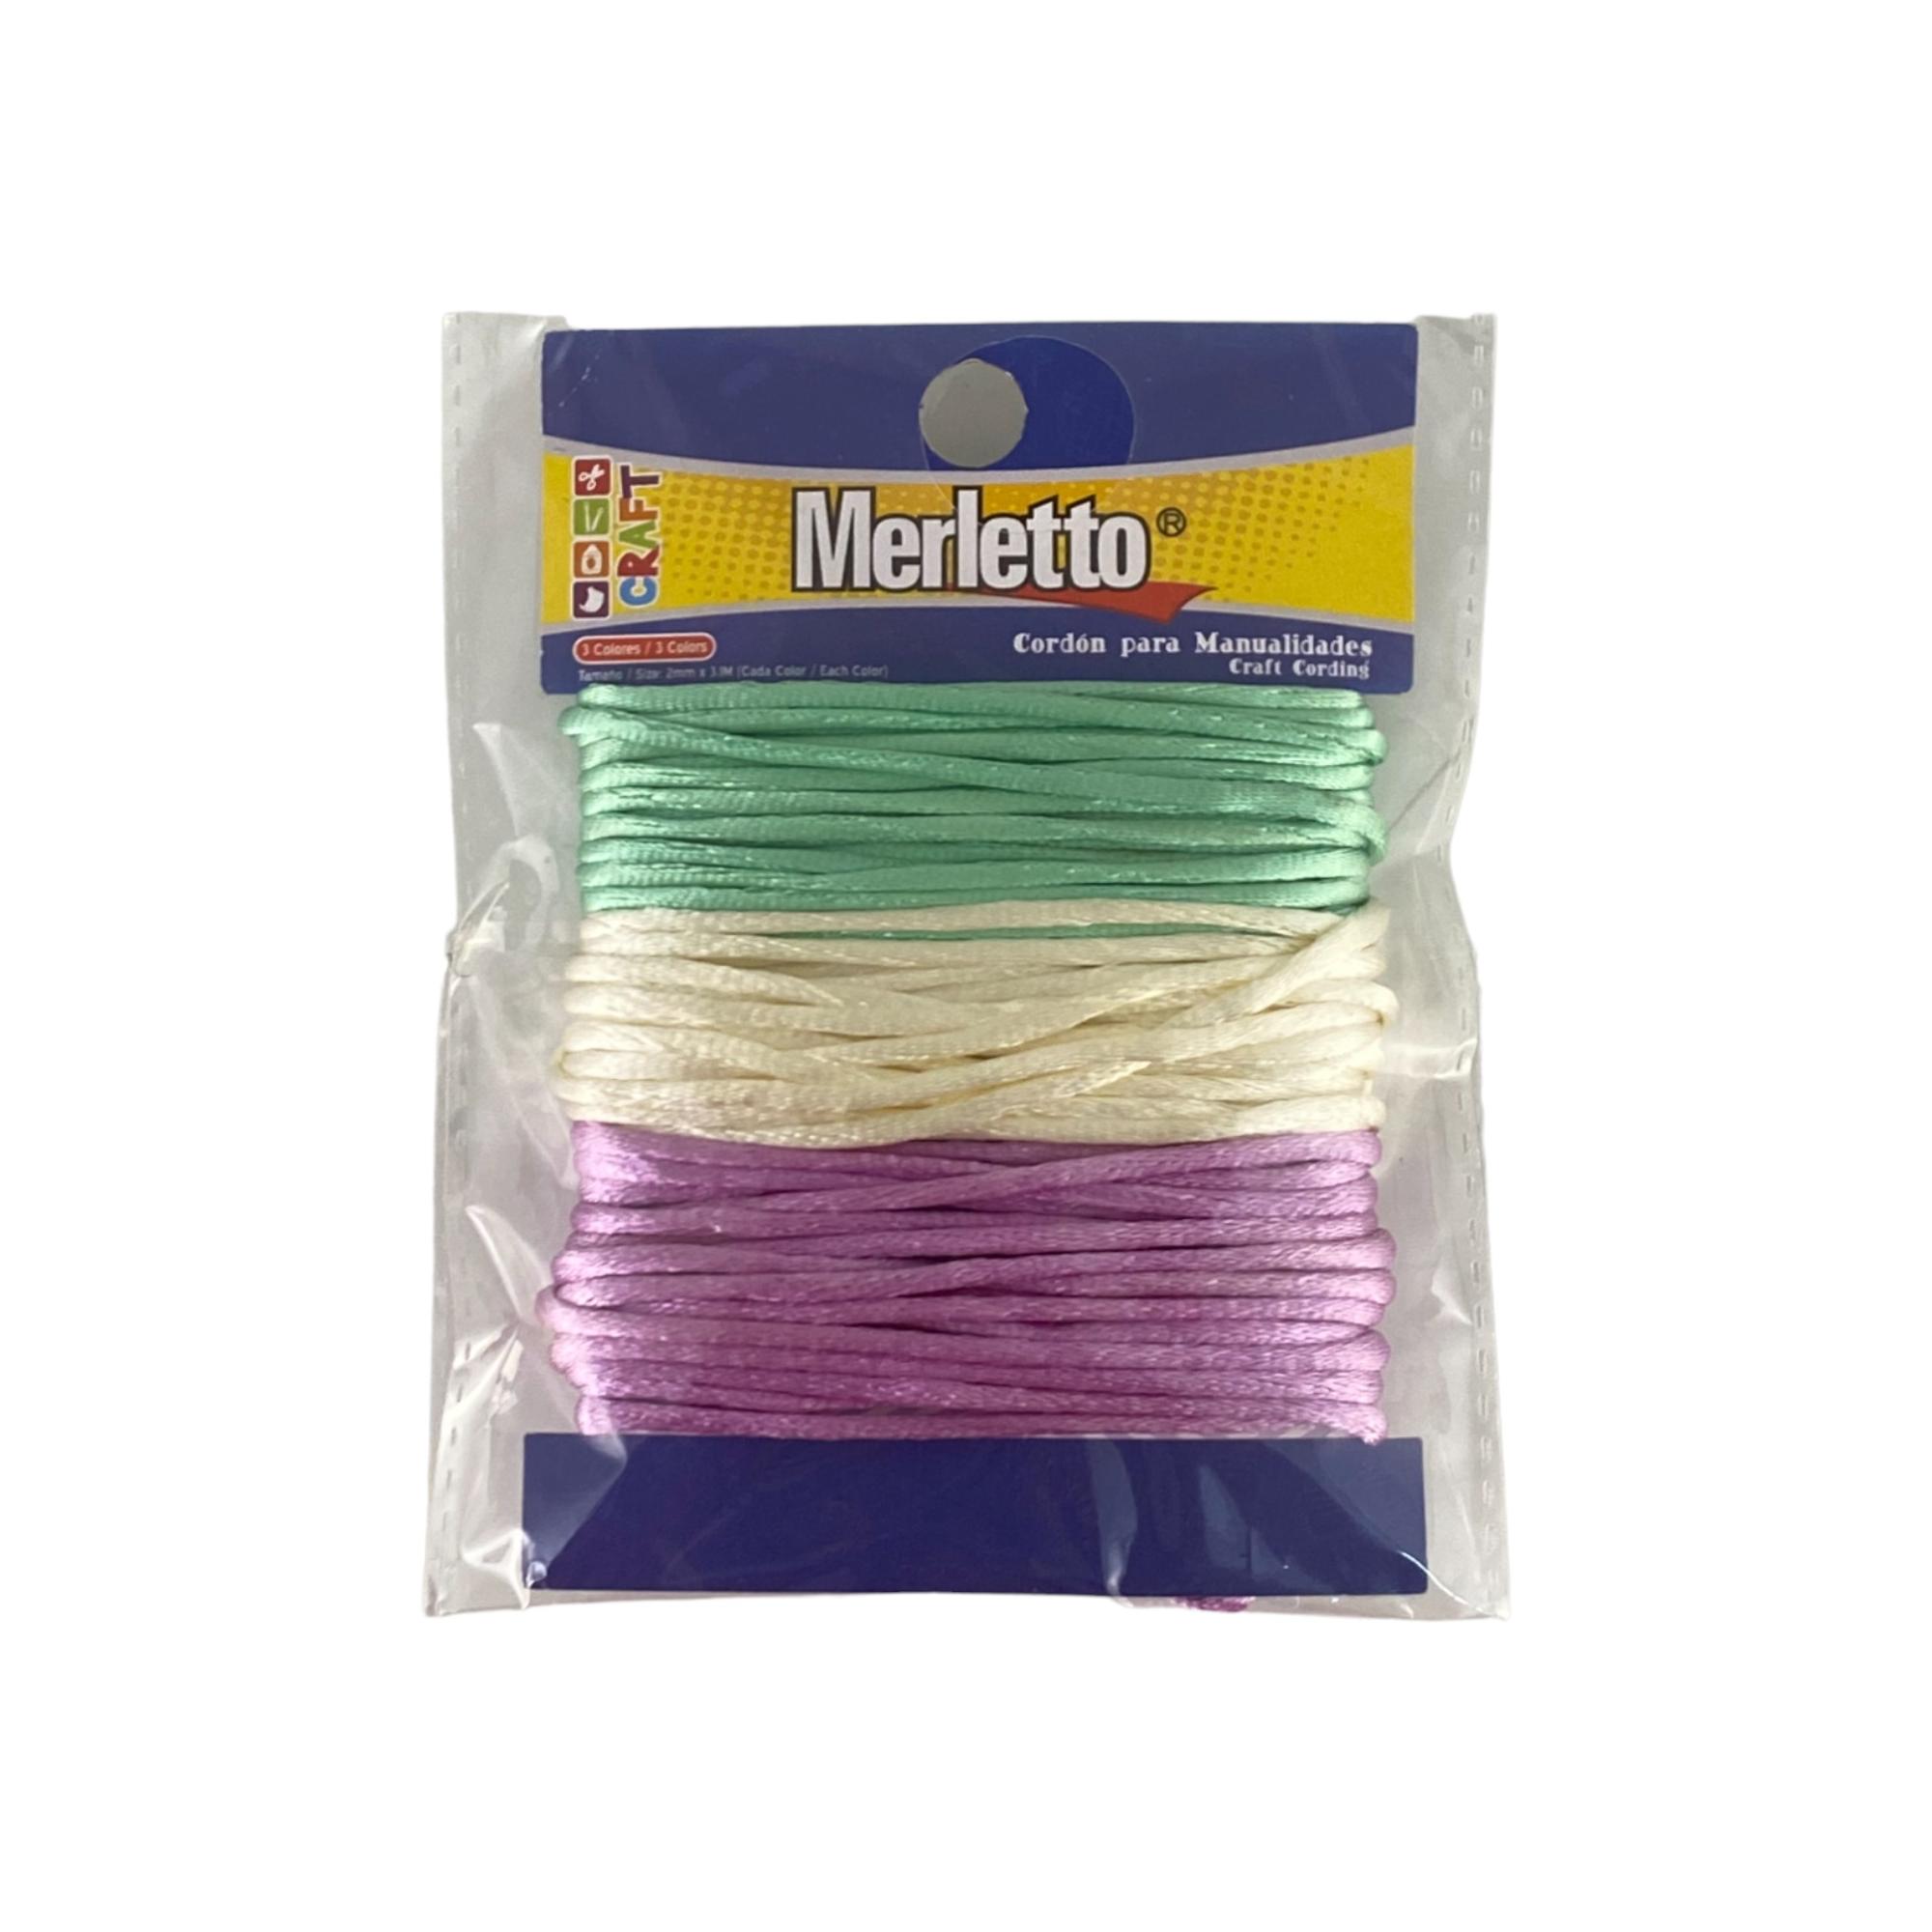 288BAGS/CTN CRAFT CORDING WITH - 785-7963790